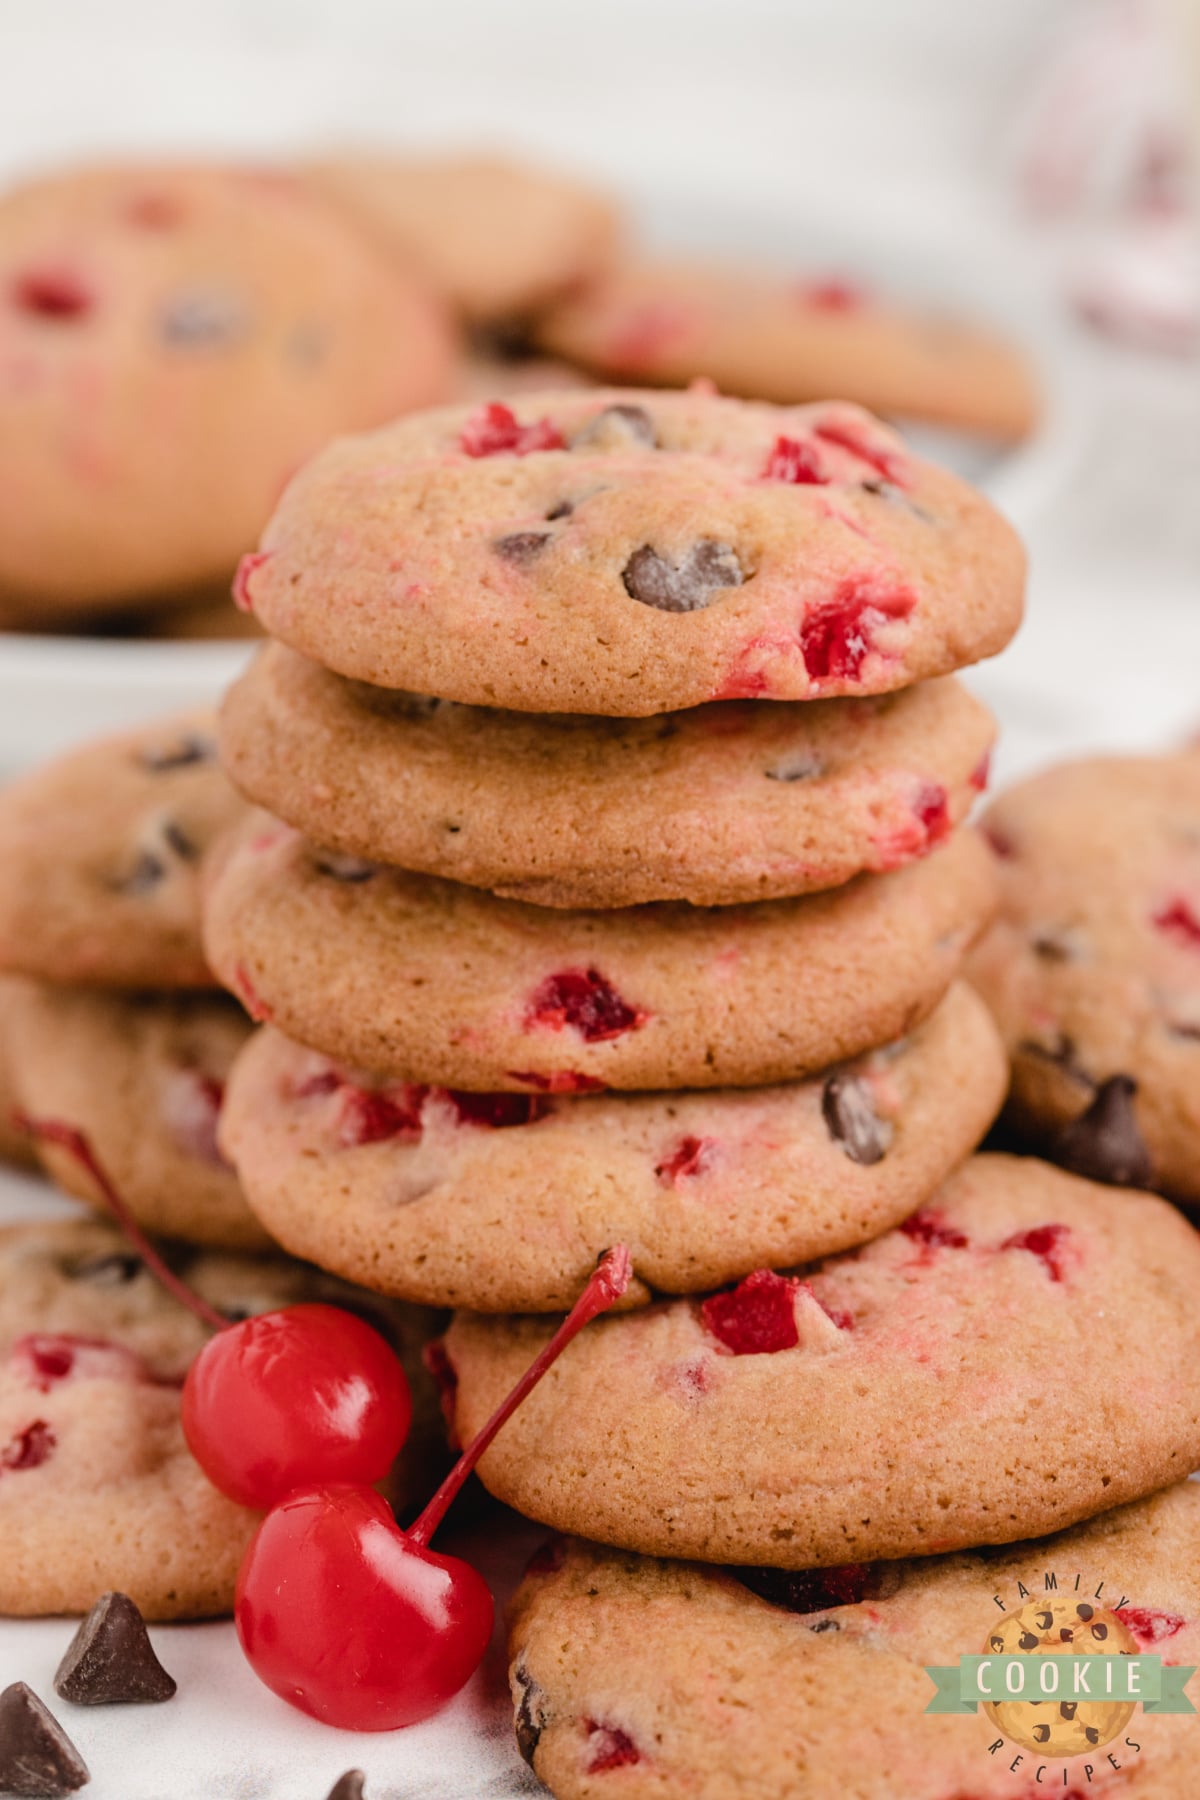 Cherry Chocolate Chip Cookies are soft, chewy and packed with cherry flavor, bits of maraschino cherries and chocolate chips! A fun and flavorful twist on traditional chocolate chip cookies.